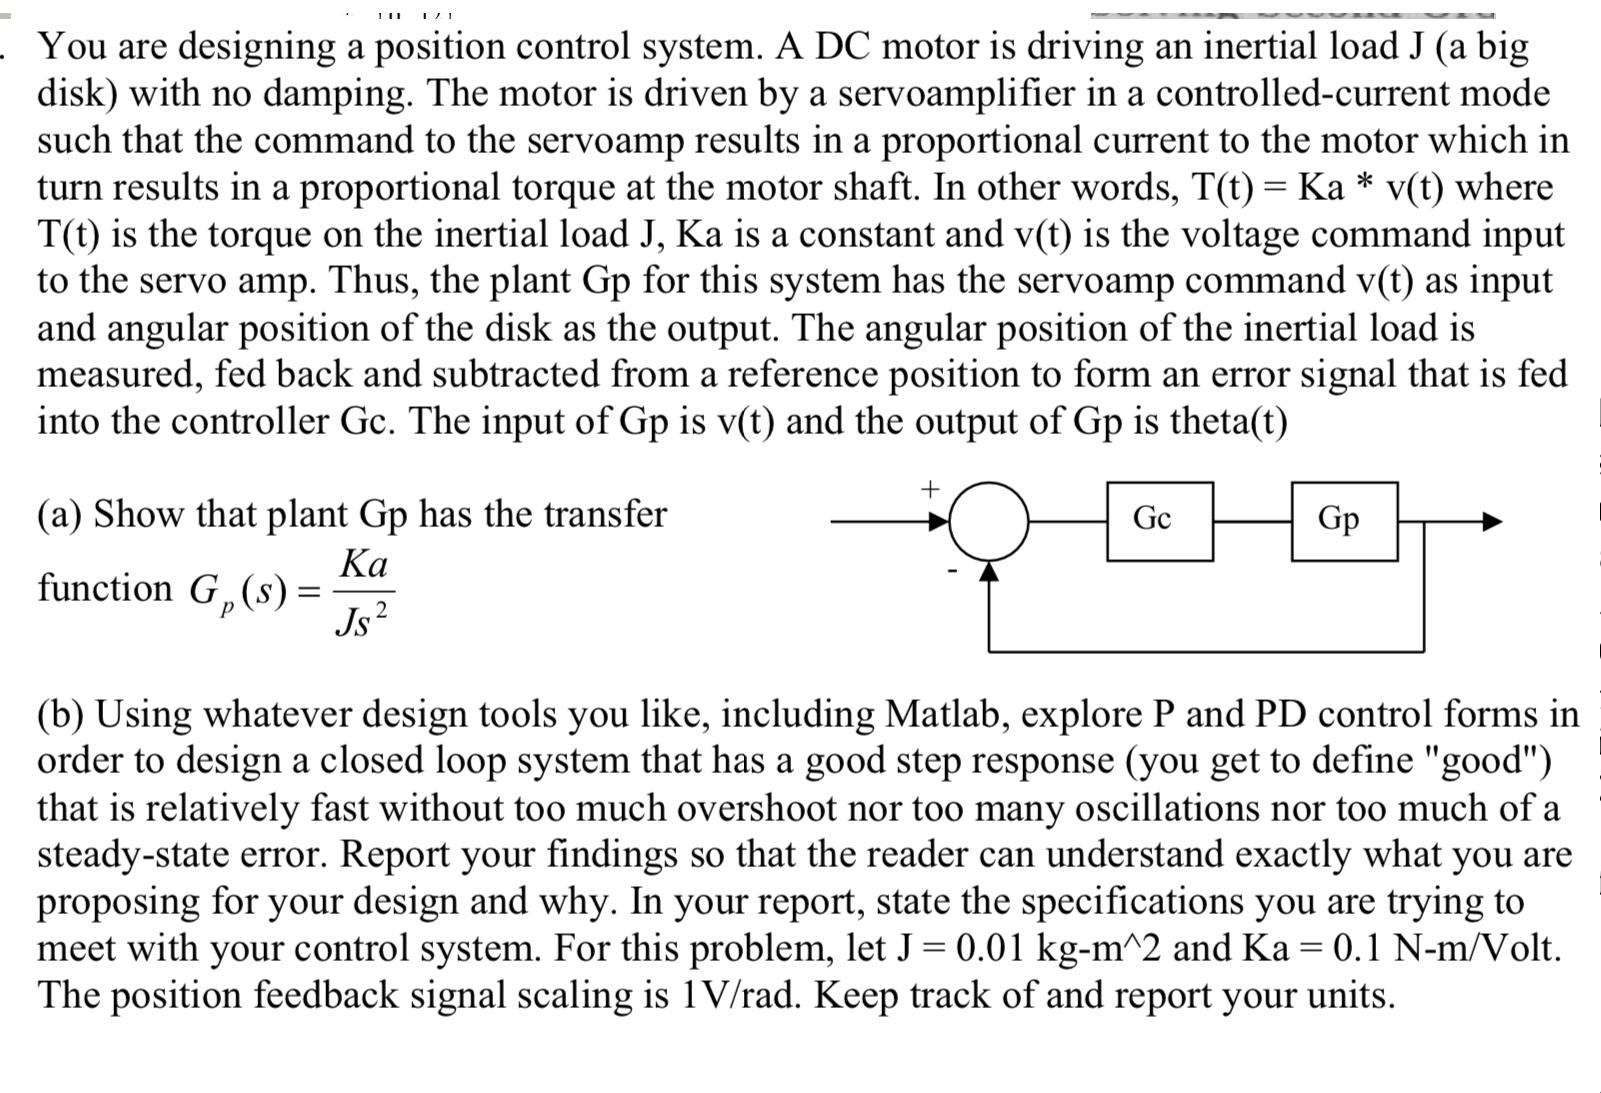 111 1/1 You are designing a position control system. A DC motor is driving an inertial load J (a big disk)